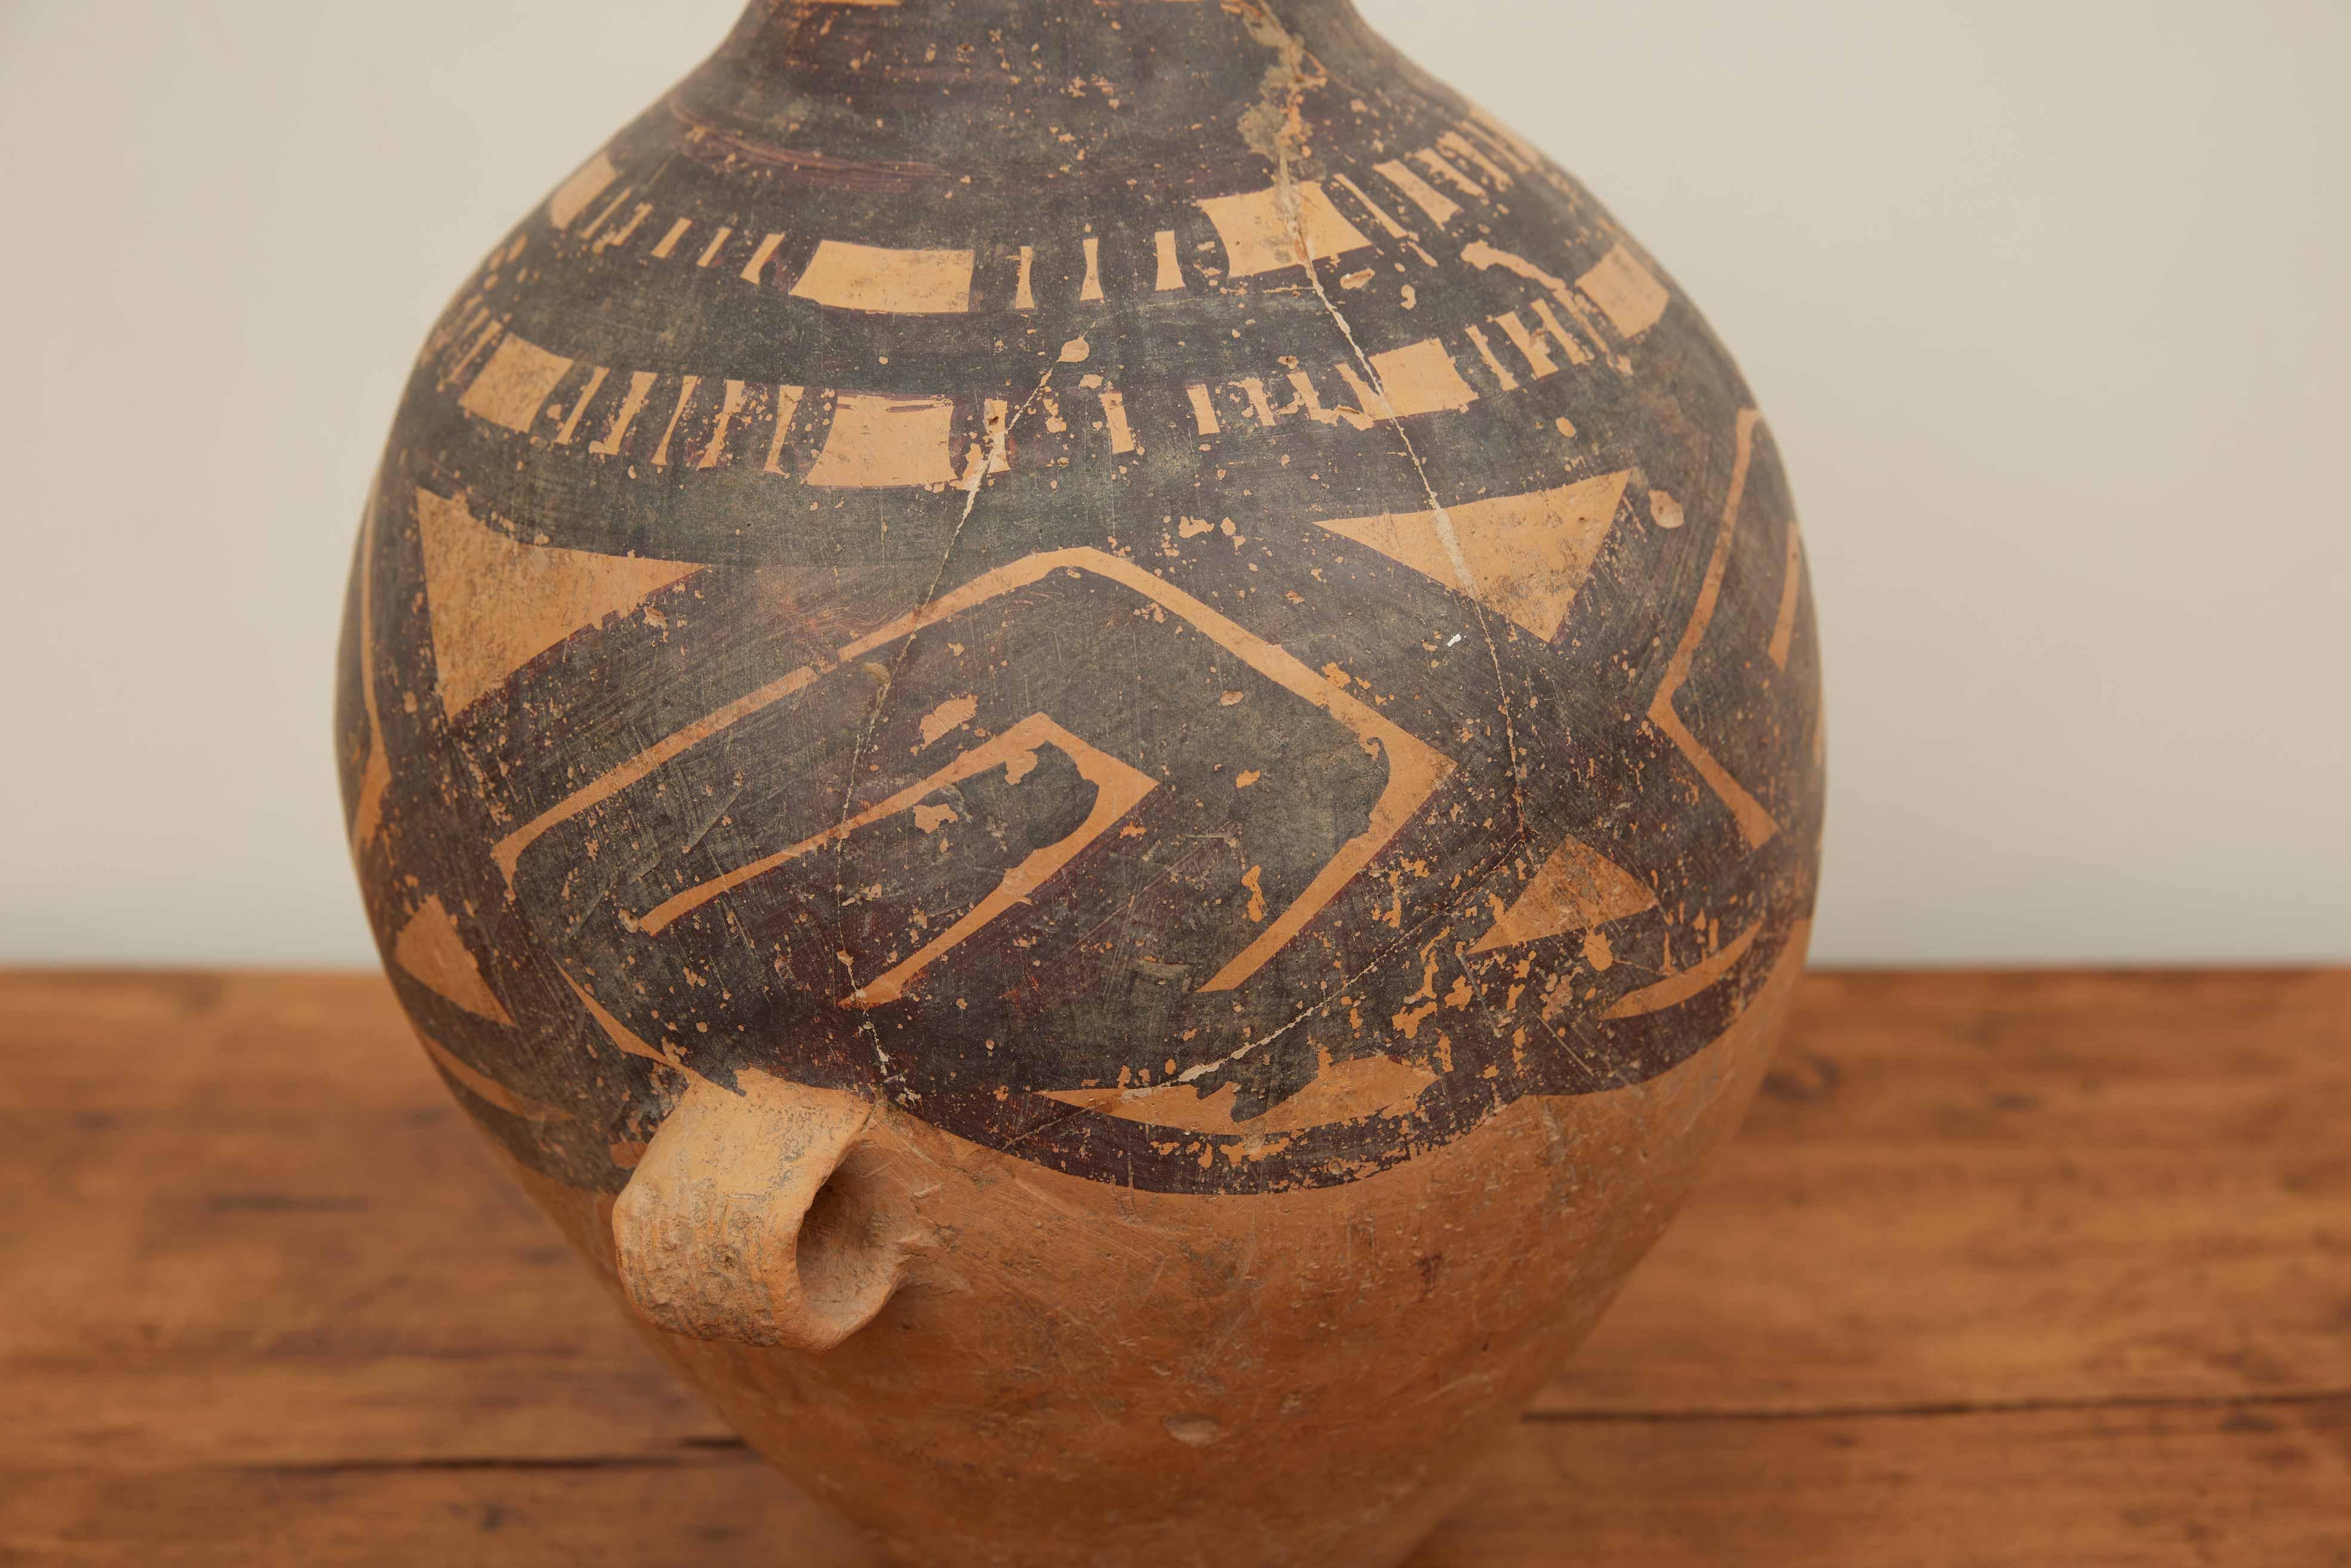 Neolithic Chinese Pottery Provenance Dr. Philip Gould (1922-2020)

The vase holds a distinguished provenance, having been part of the collection of Dr. Philip Gould (1922-2020), an esteemed Columbia Professor and avid collector passionate about